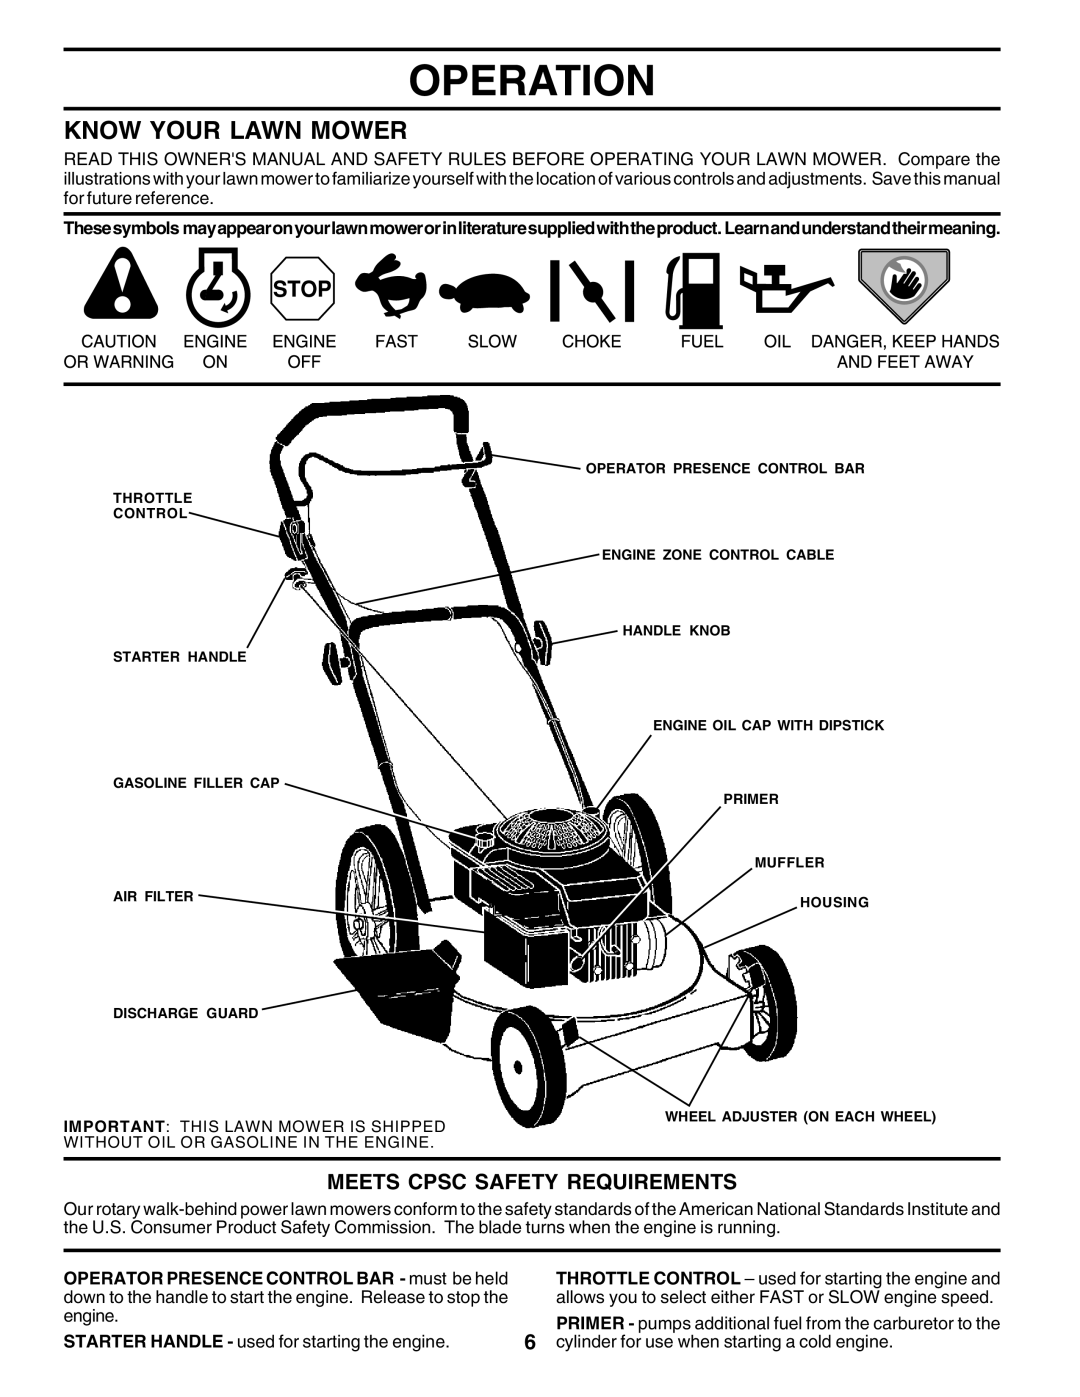 Husqvarna 6022SH owner manual Operation, Know Your Lawn Mower, Meets Cpsc Safety Requirements 